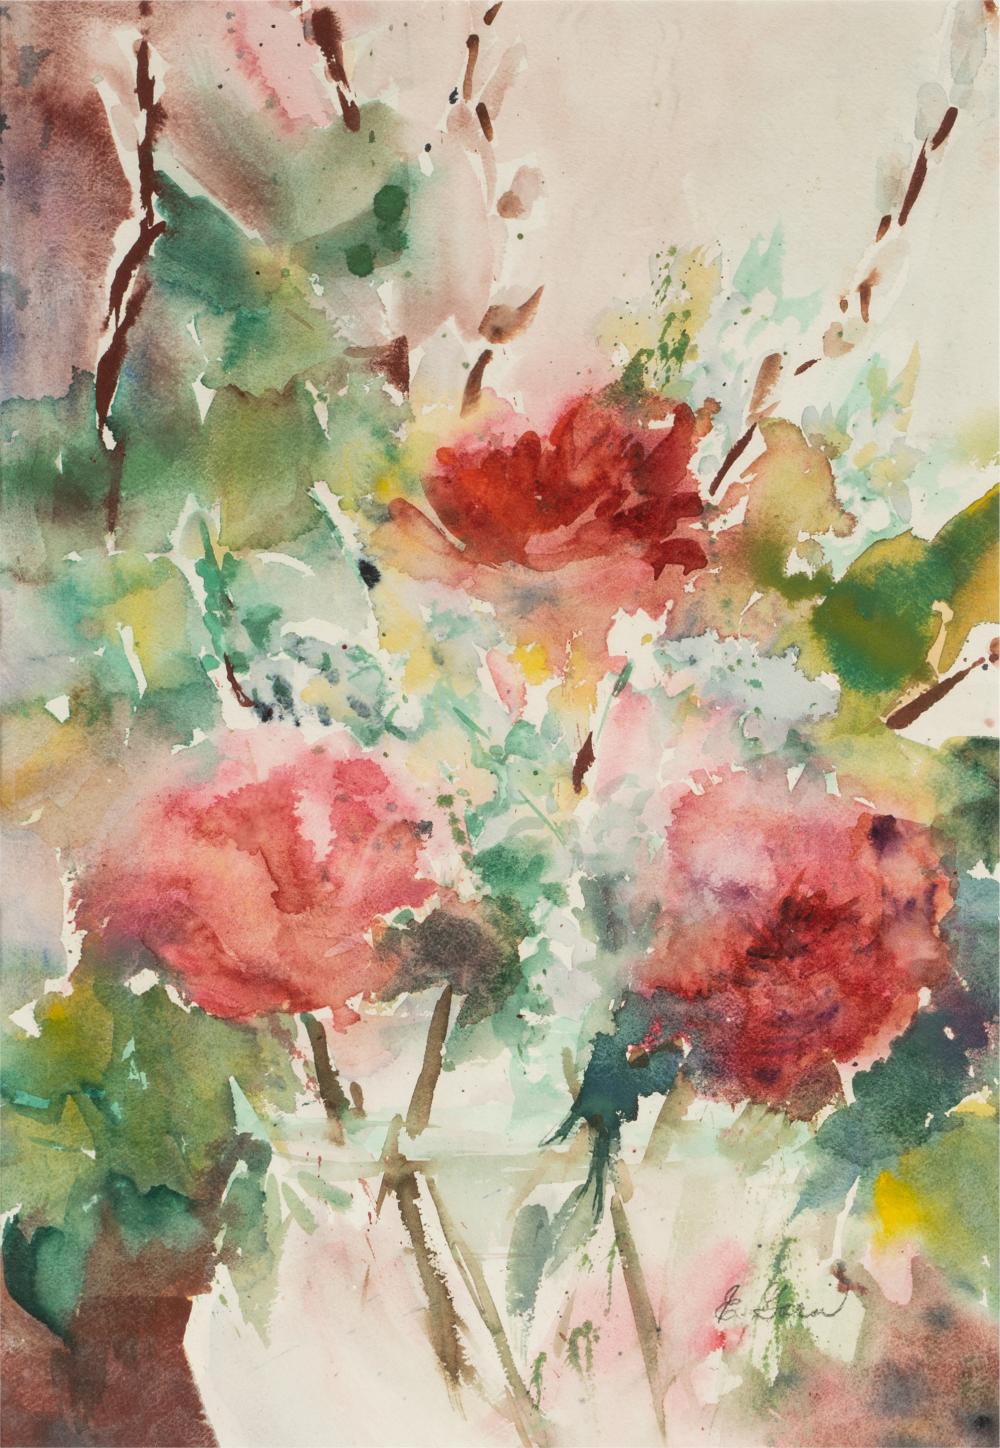 20TH CENTURY: ROSESwatercolor on paper,